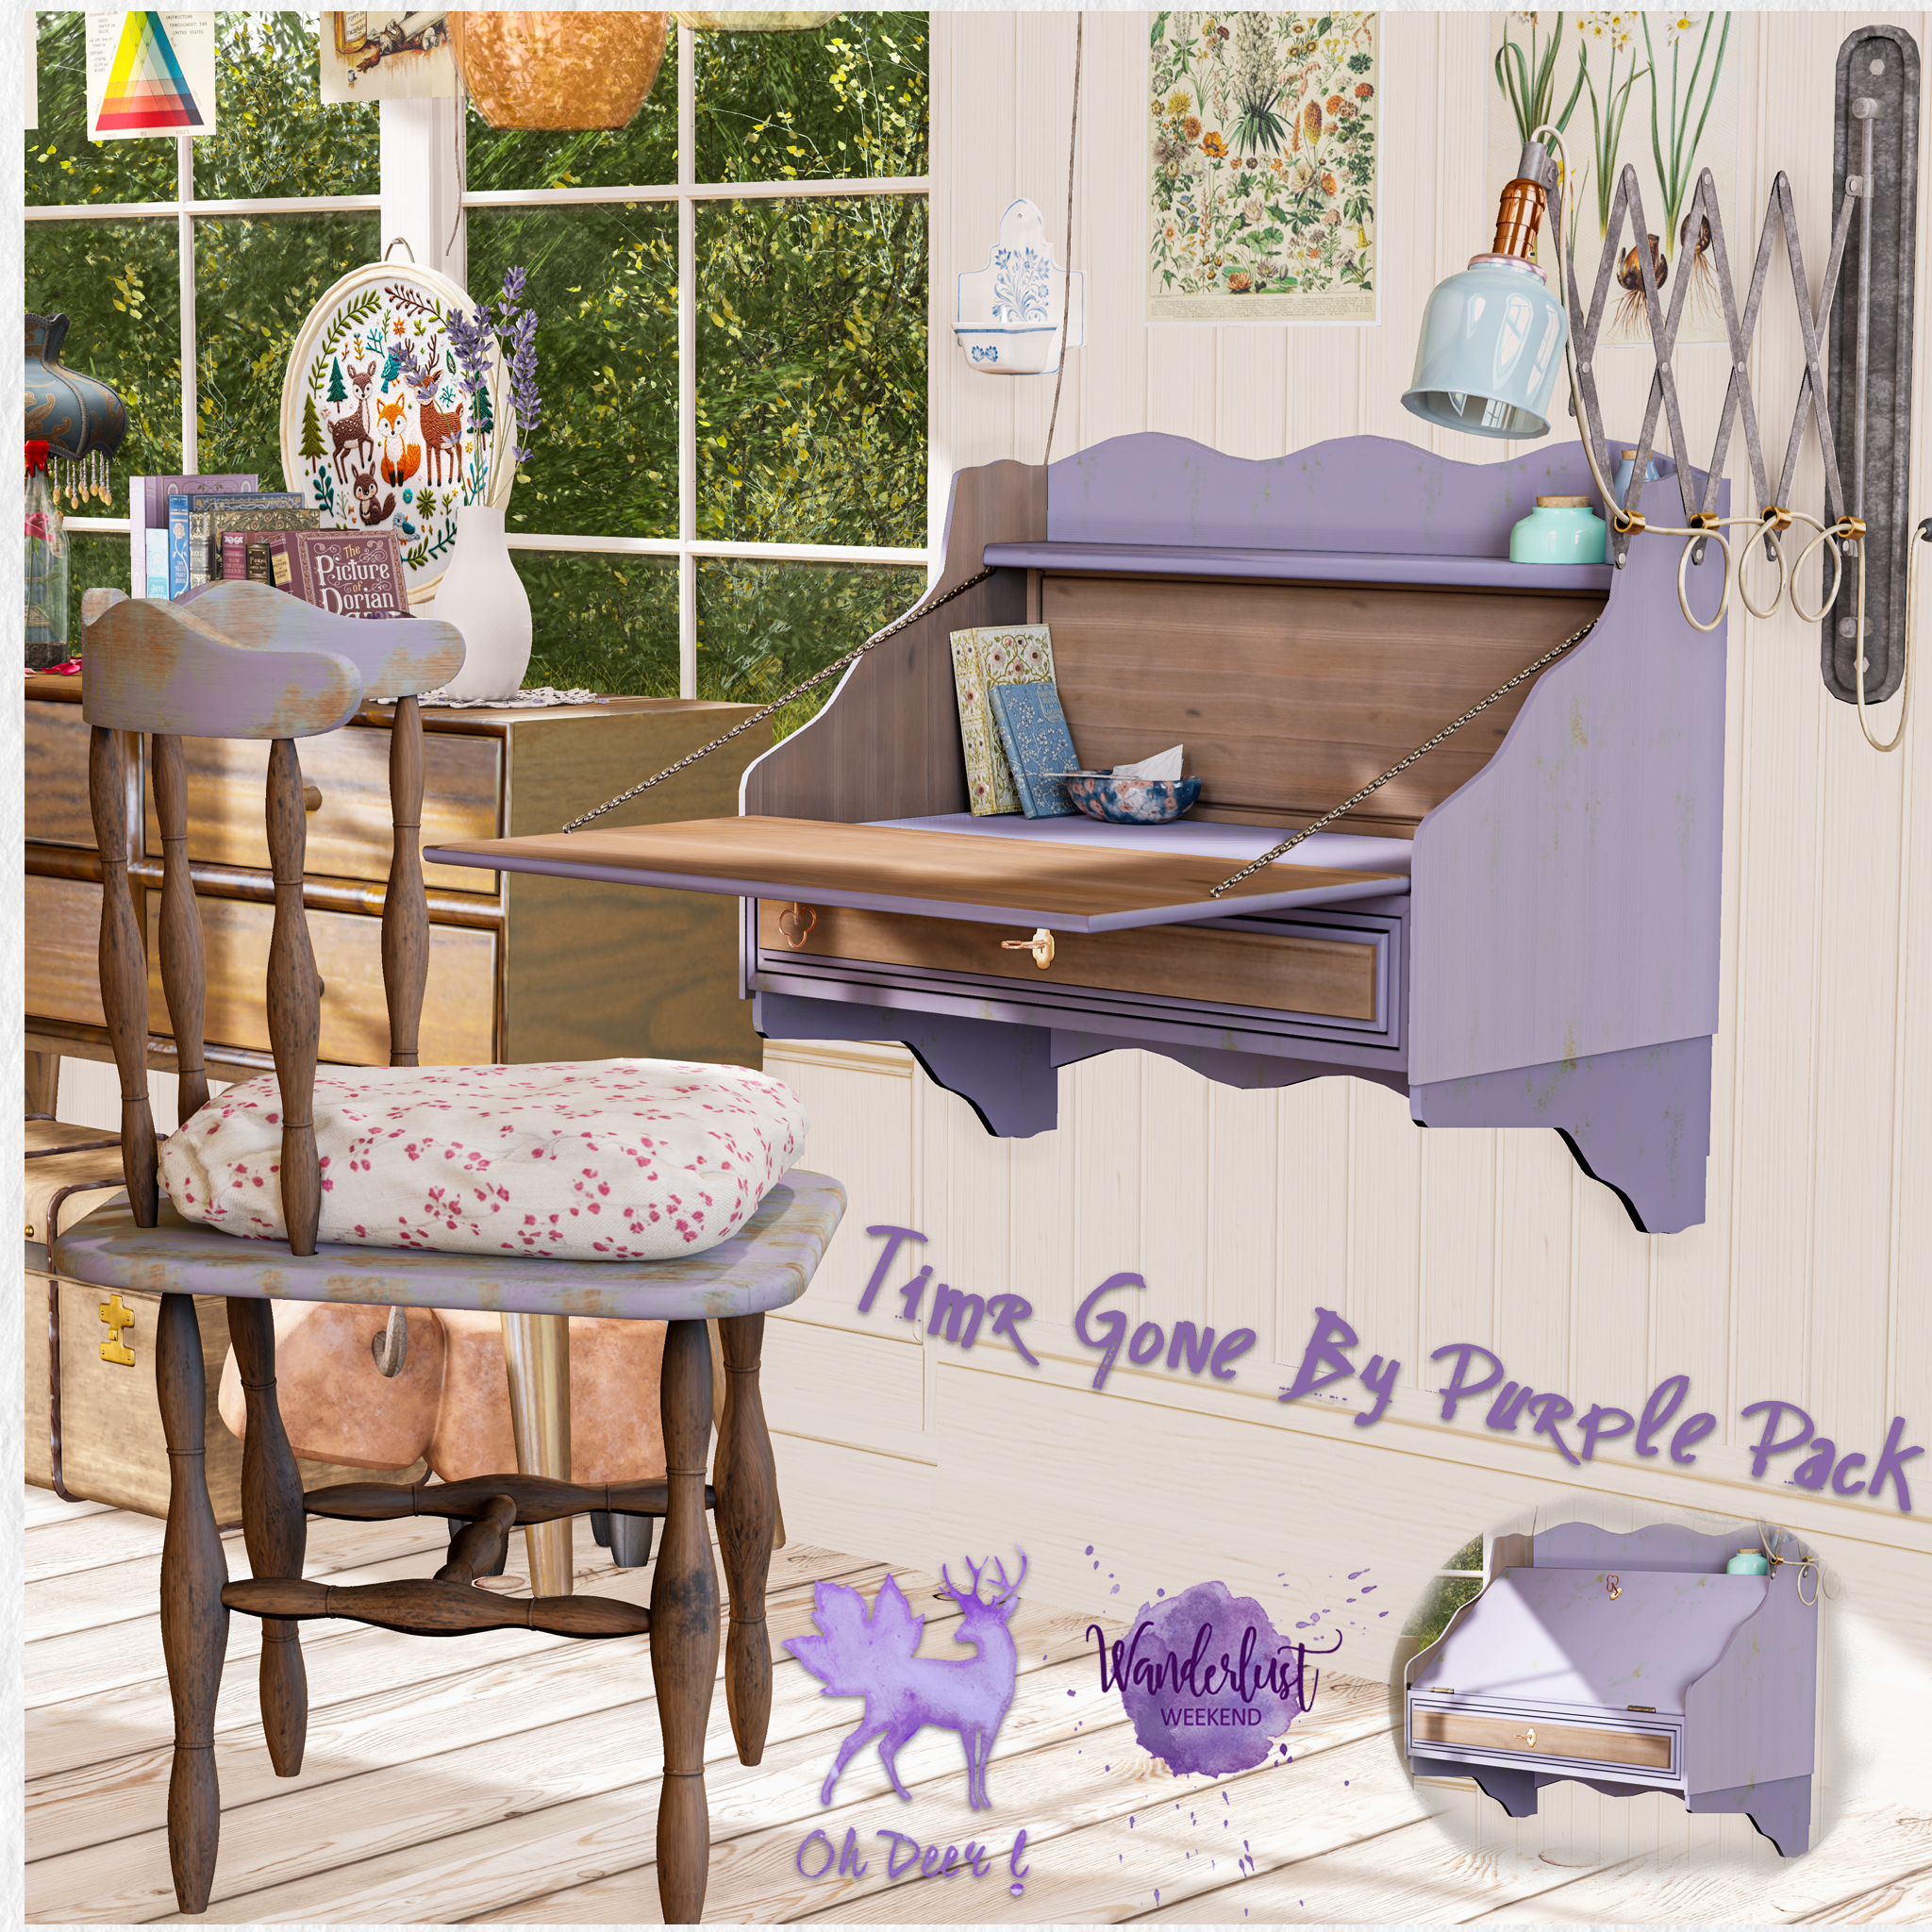 Oh Deer – Time Gone By Purple Pack